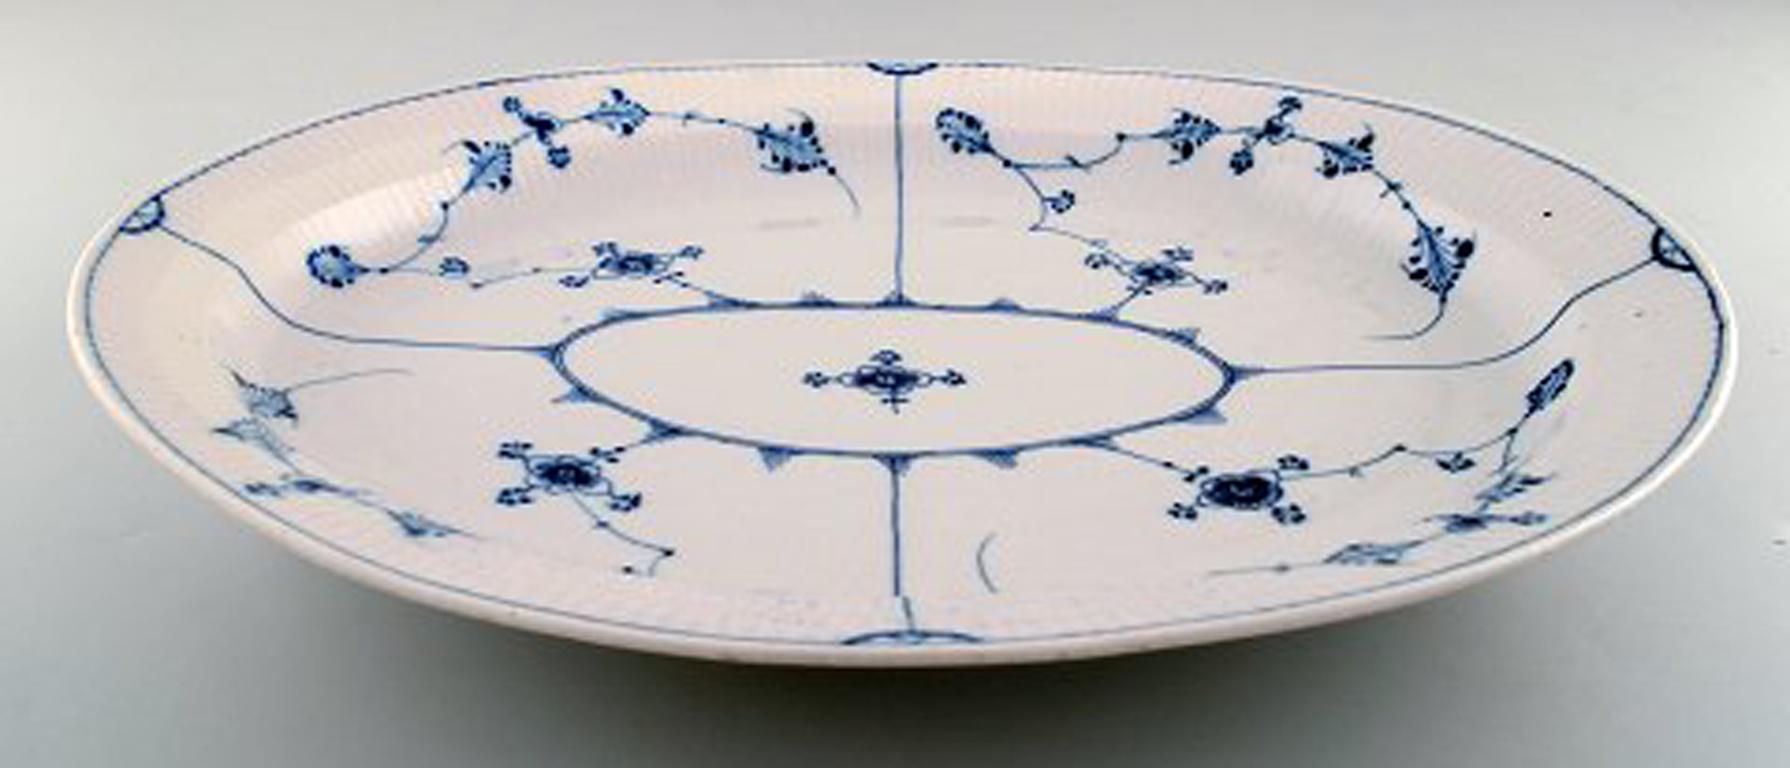 Early and rare Royal Copenhagen large oval dish in museum quality. Early 19th century.
Measures: 44 x 36 x 6 cm.
In very good condition.